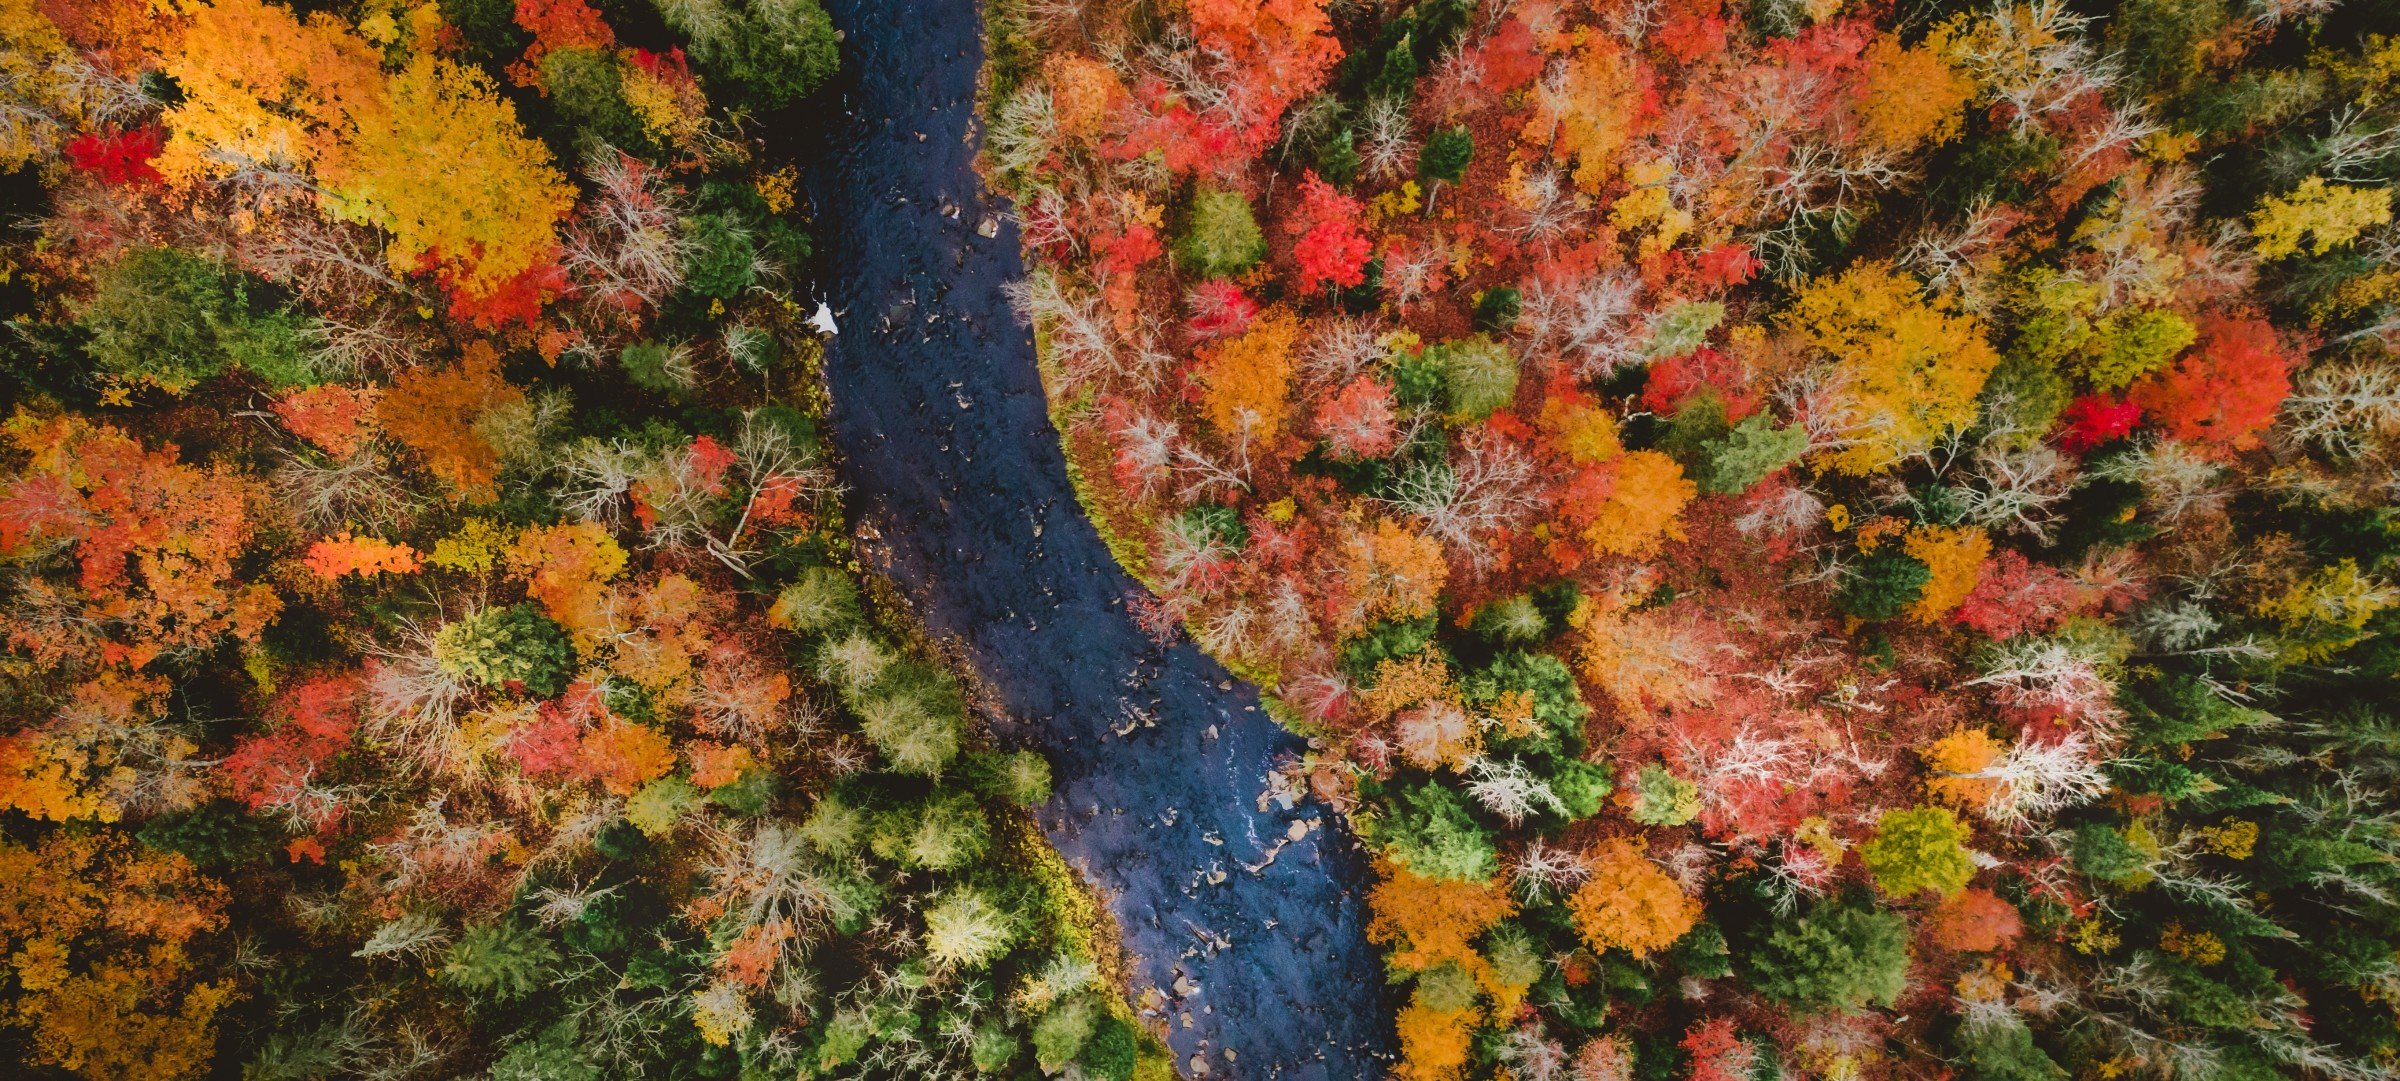 Overhead photo of forest and stream in fall